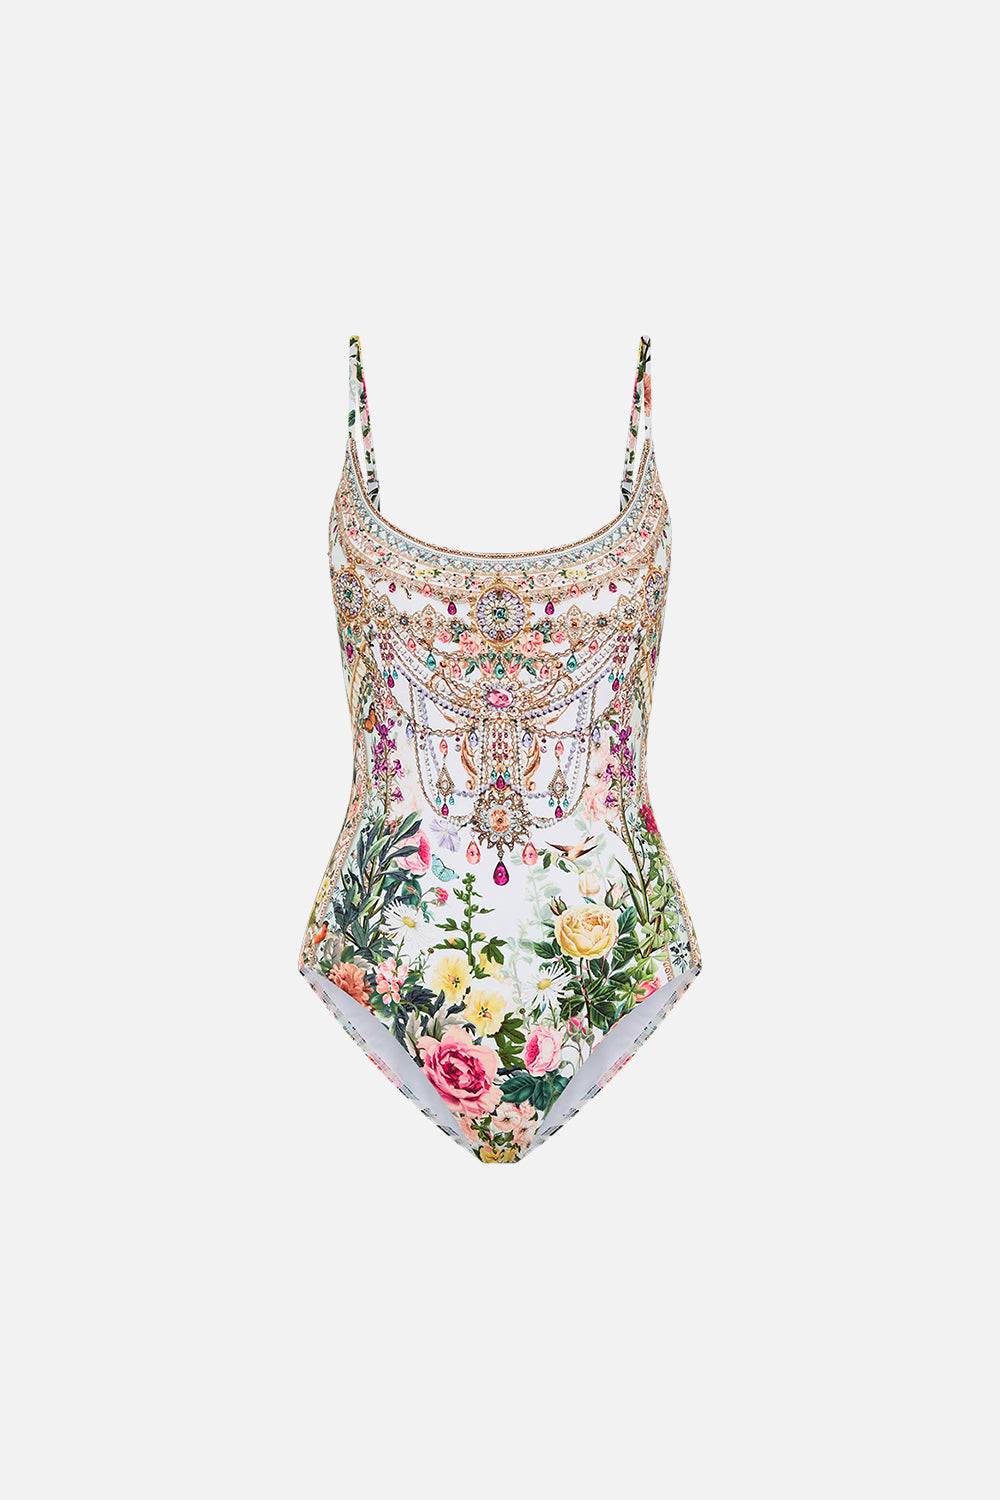 Product view of CAMILLA designer one piece swimsuit in Renaissance Romance print 